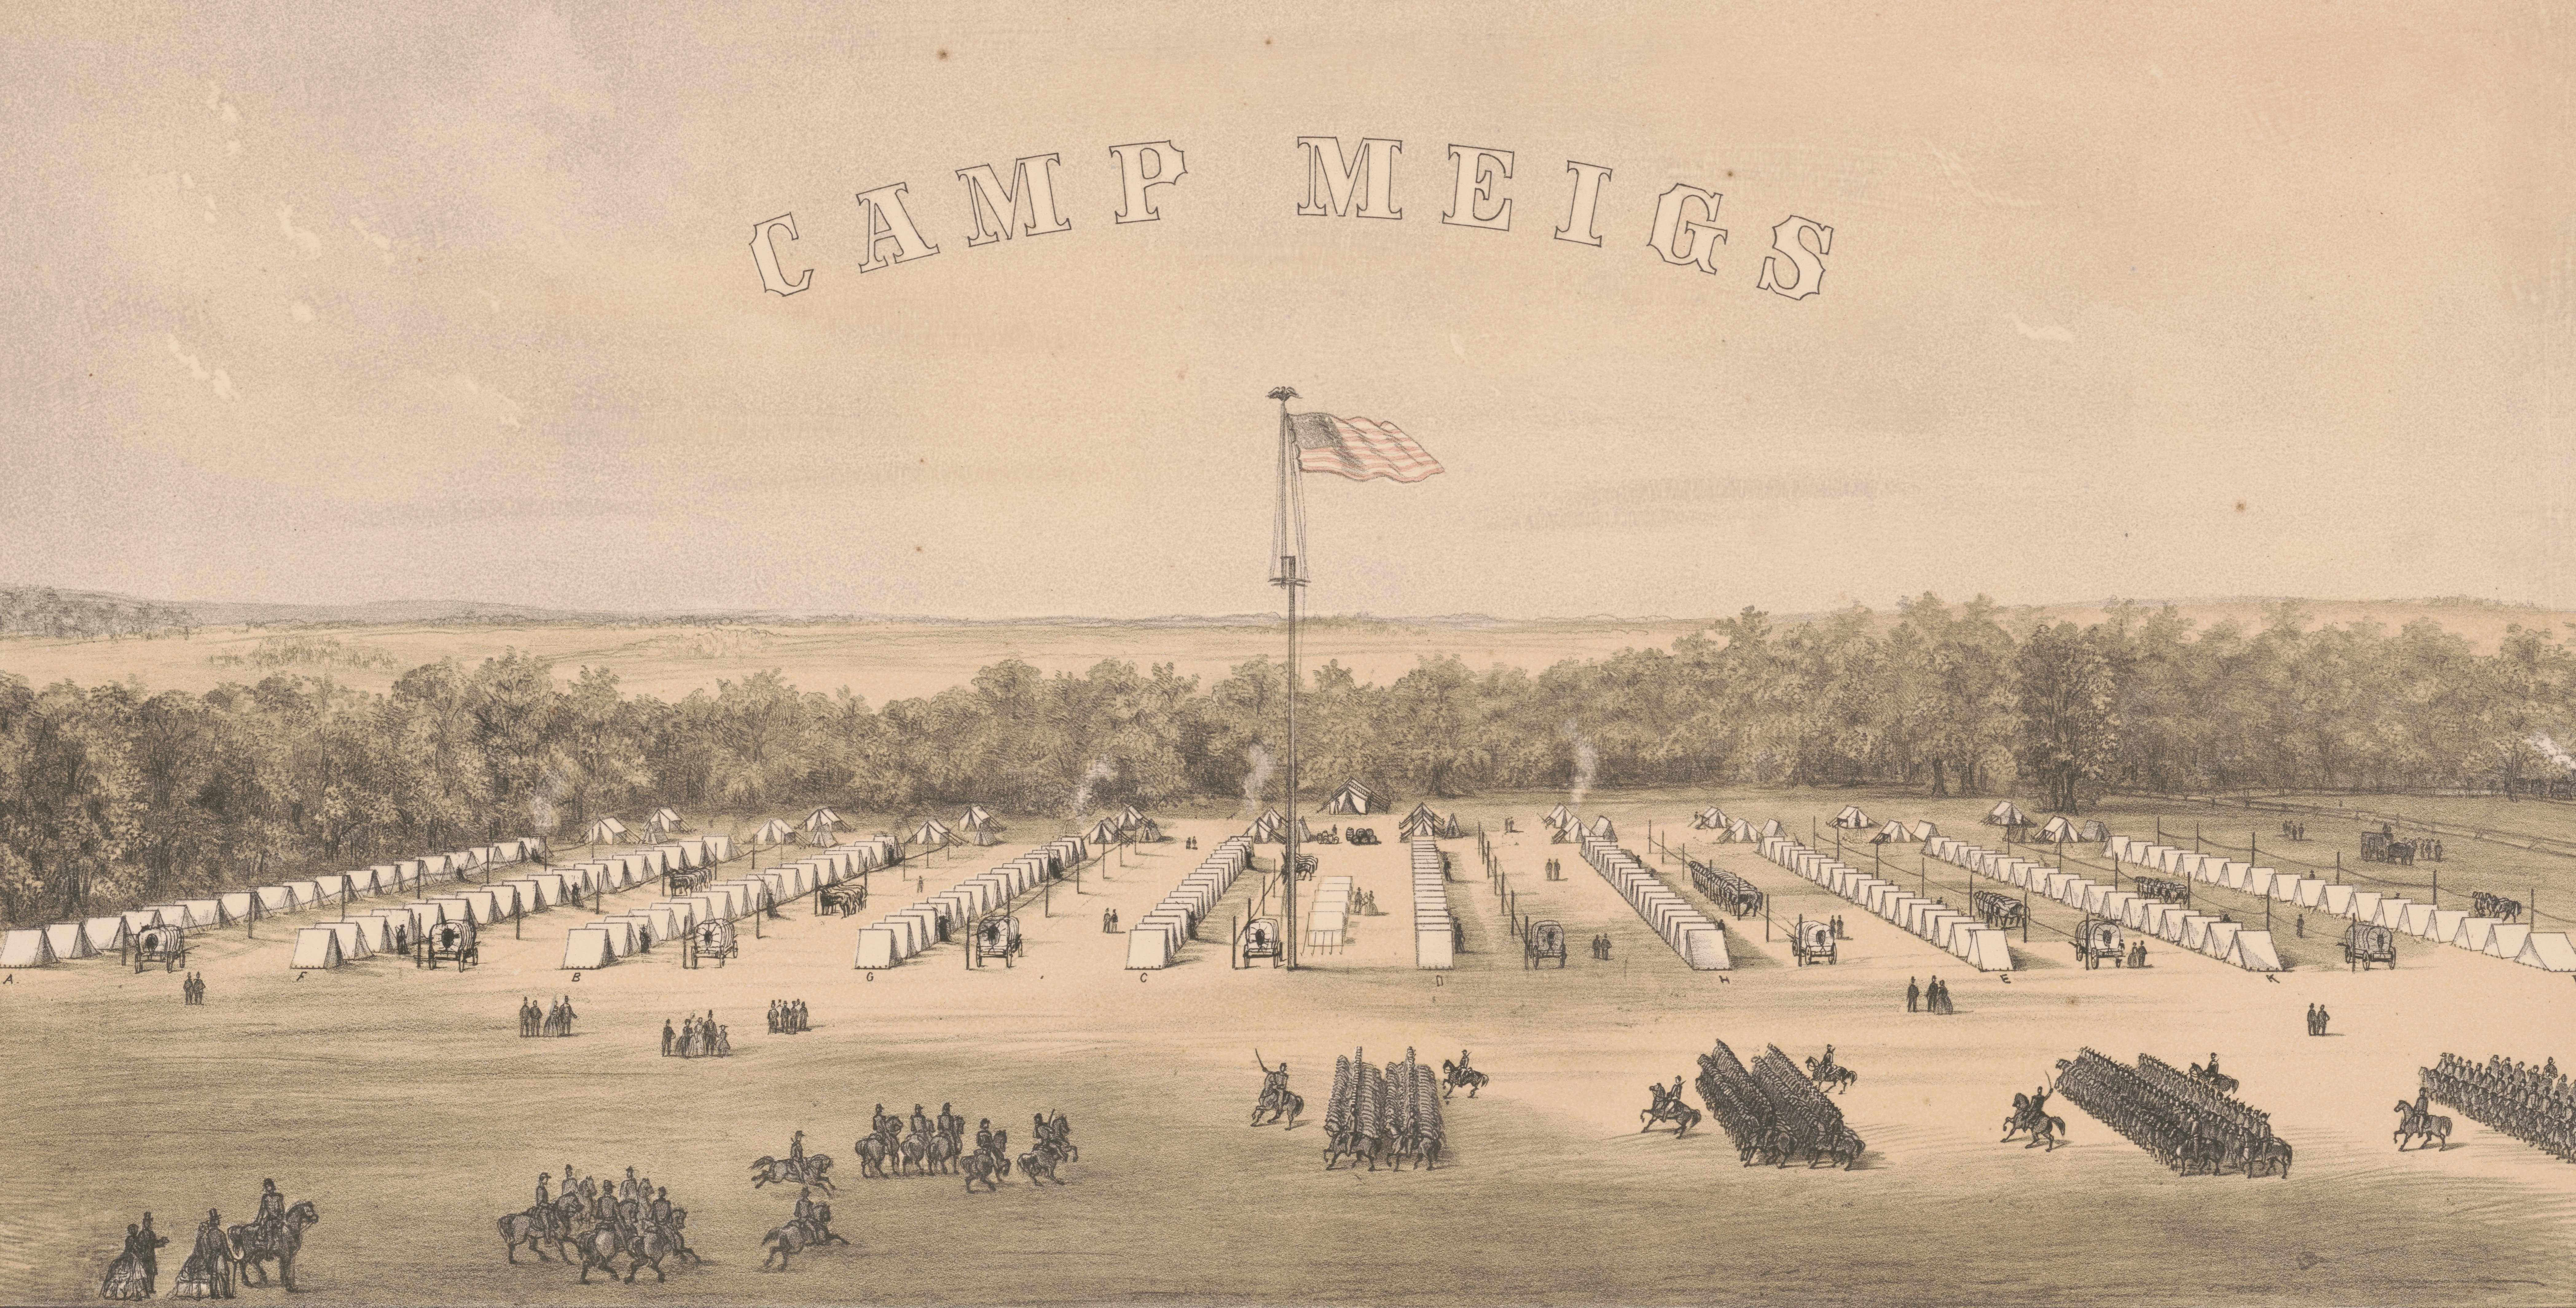 Active military field with 11 rows of tents lined up and a flag pole in the center. Groups of soldiers on horseback are marching and drilling in the foreground.